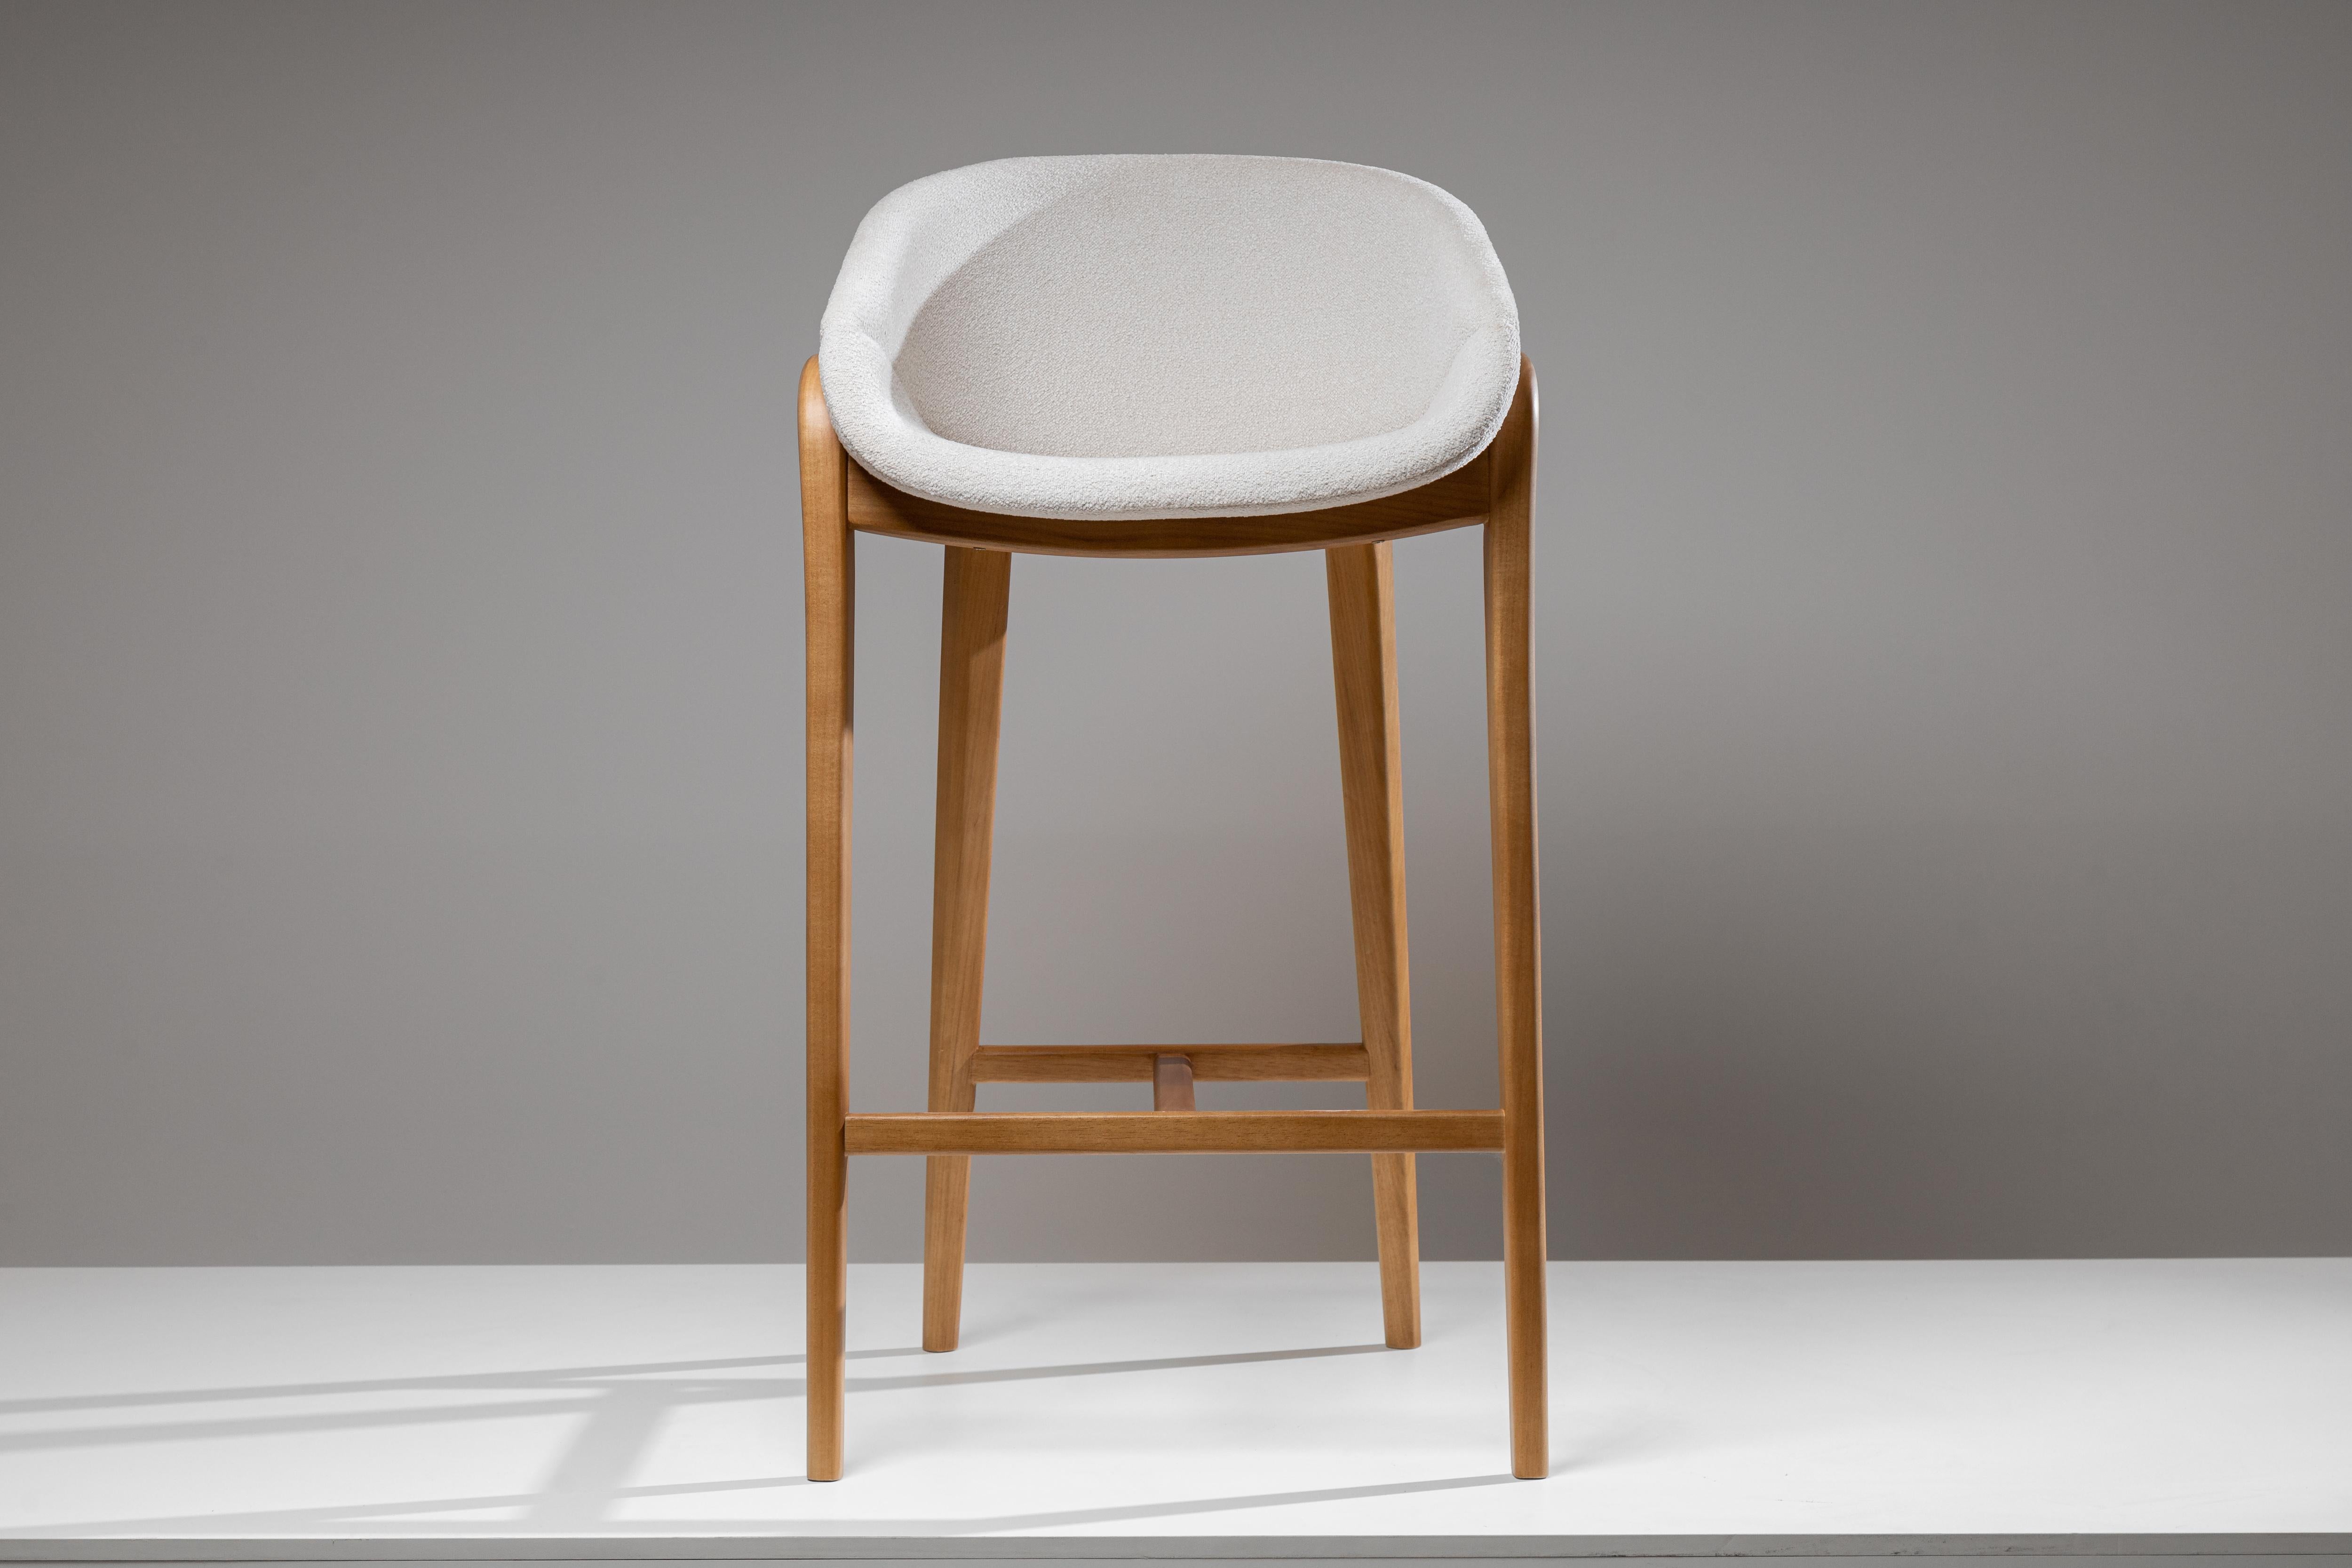 This series, composed of a chair and stools in two heights, has its generating line defined by a central arch that simultaneously divides and defines the seat and the backrest.
In a strategy of articulating forms that promotes the maximum of curves